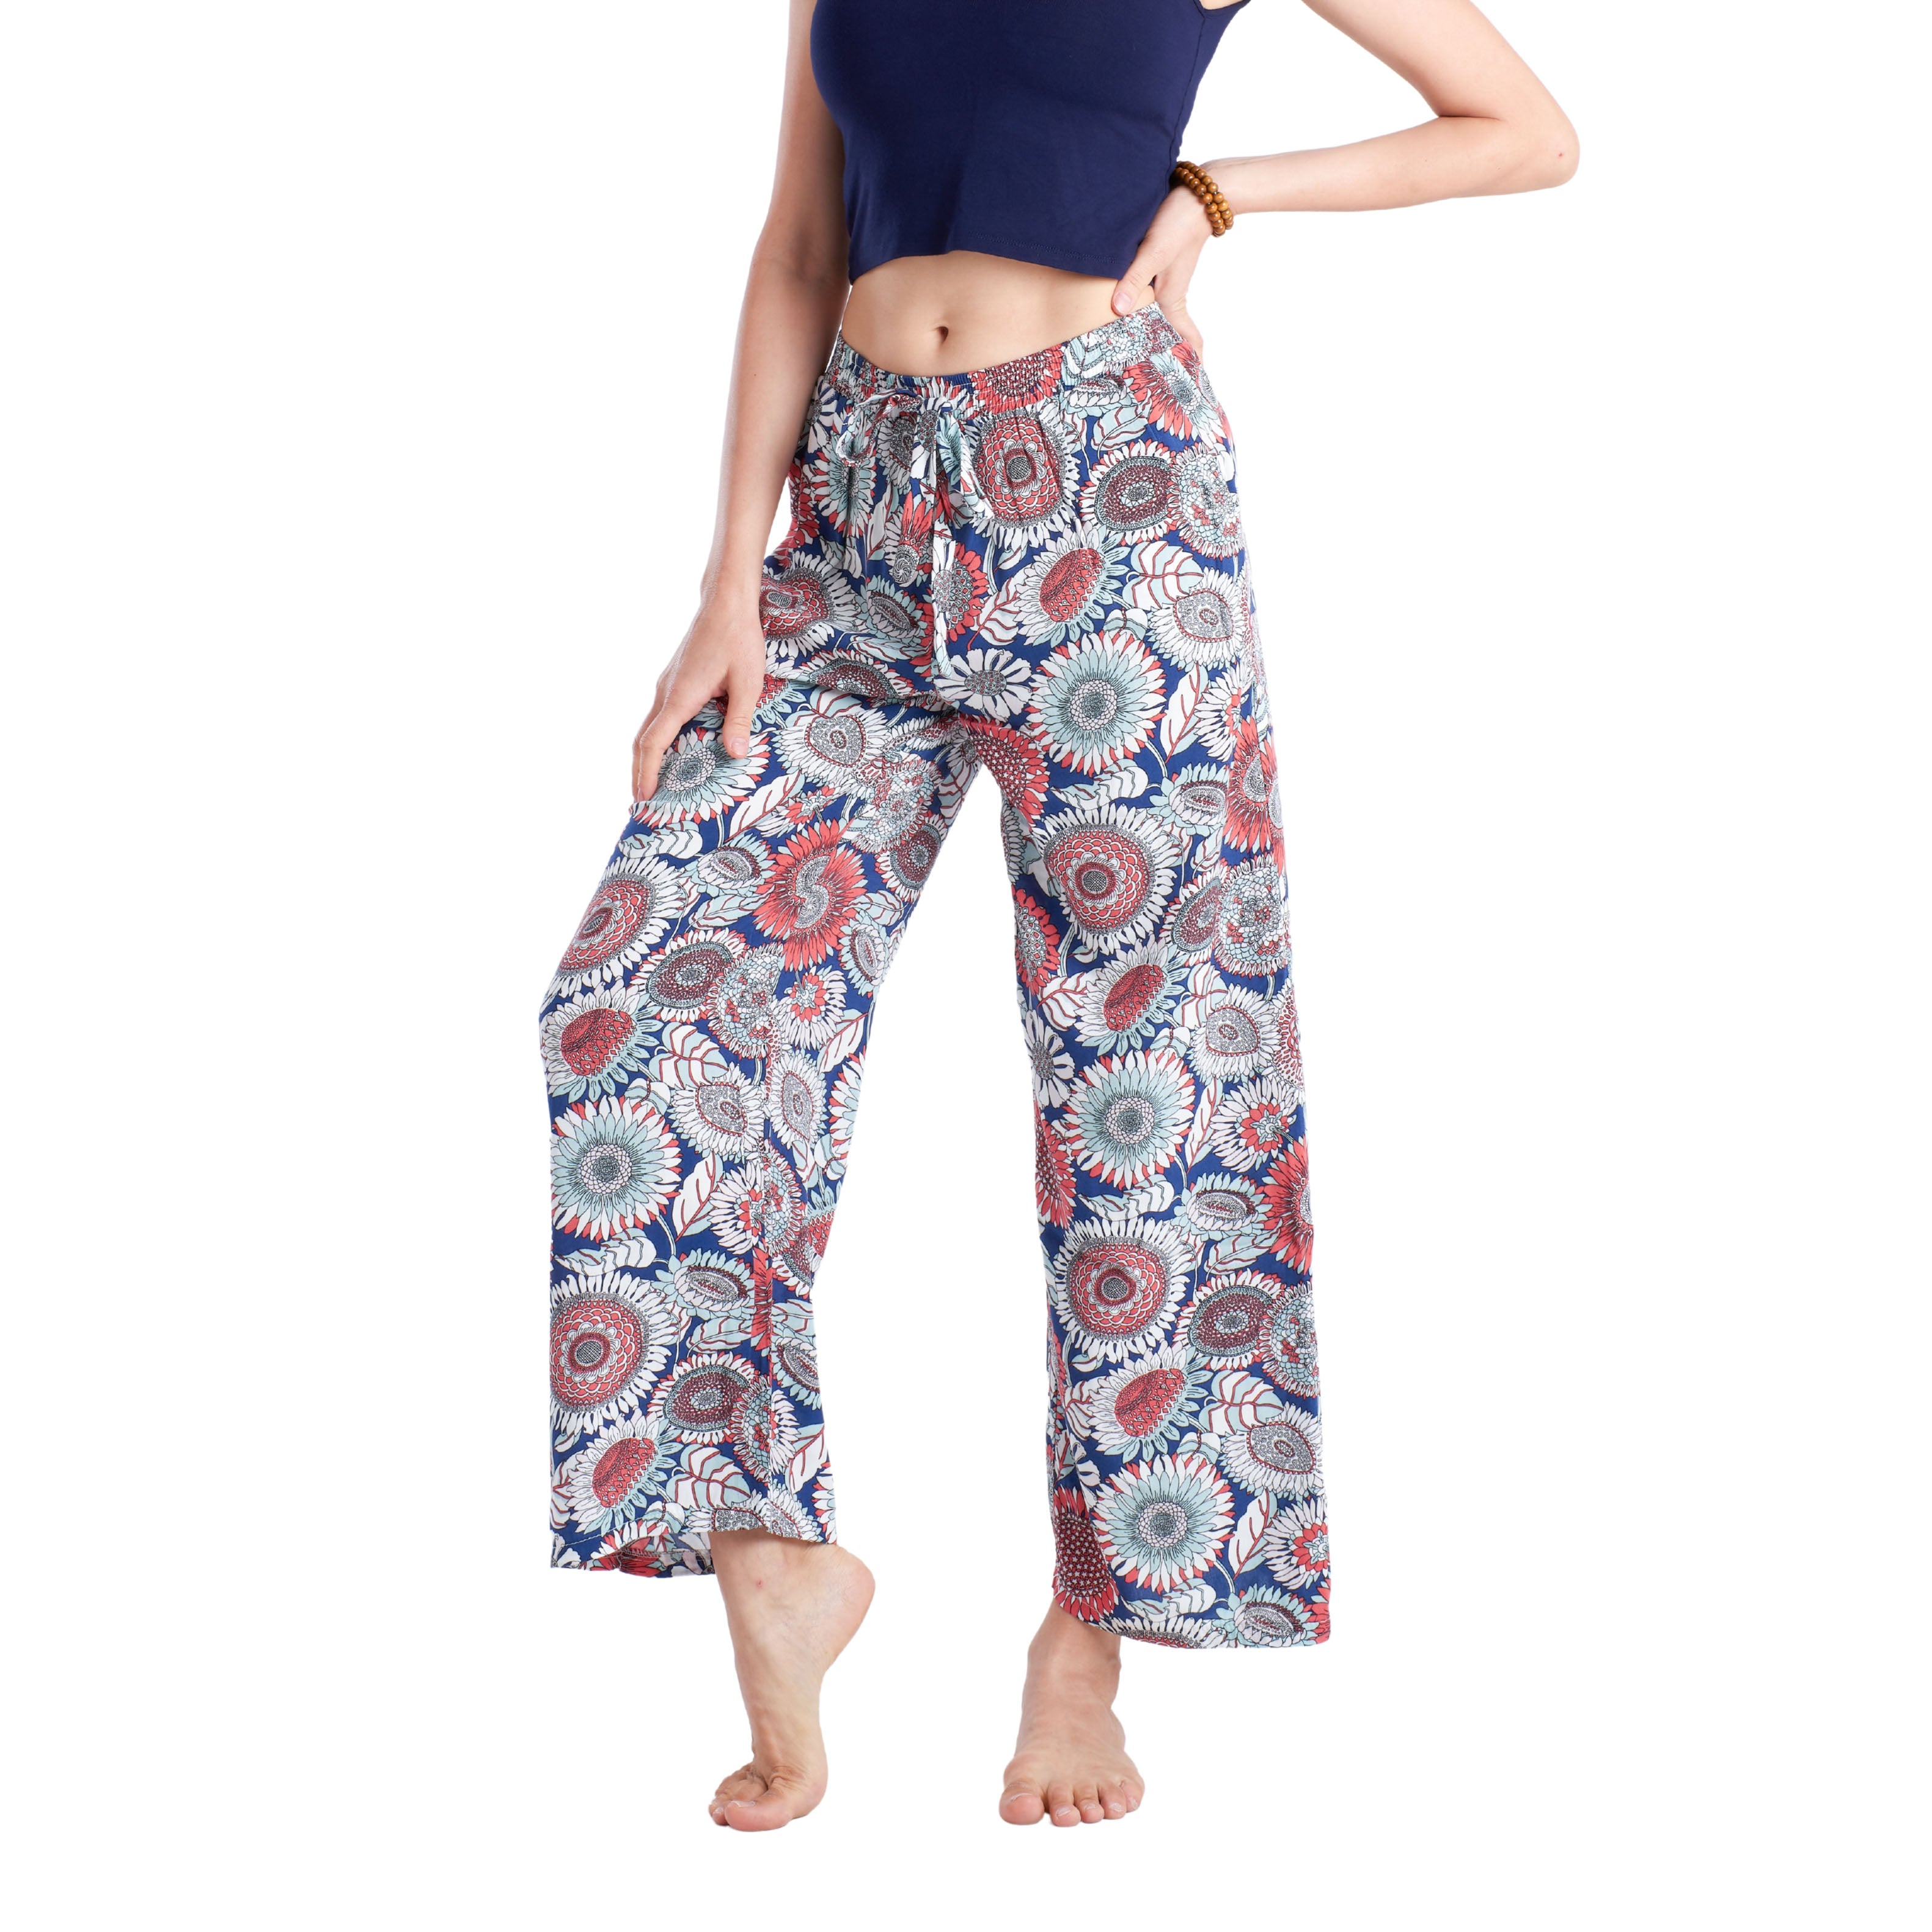 BACALAR PANTS Elepanta Casual Pants - Buy Today Elephant Pants Jewelry And Bohemian Clothes Handmade In Thailand Help To Save The Elephants FairTrade And Vegan